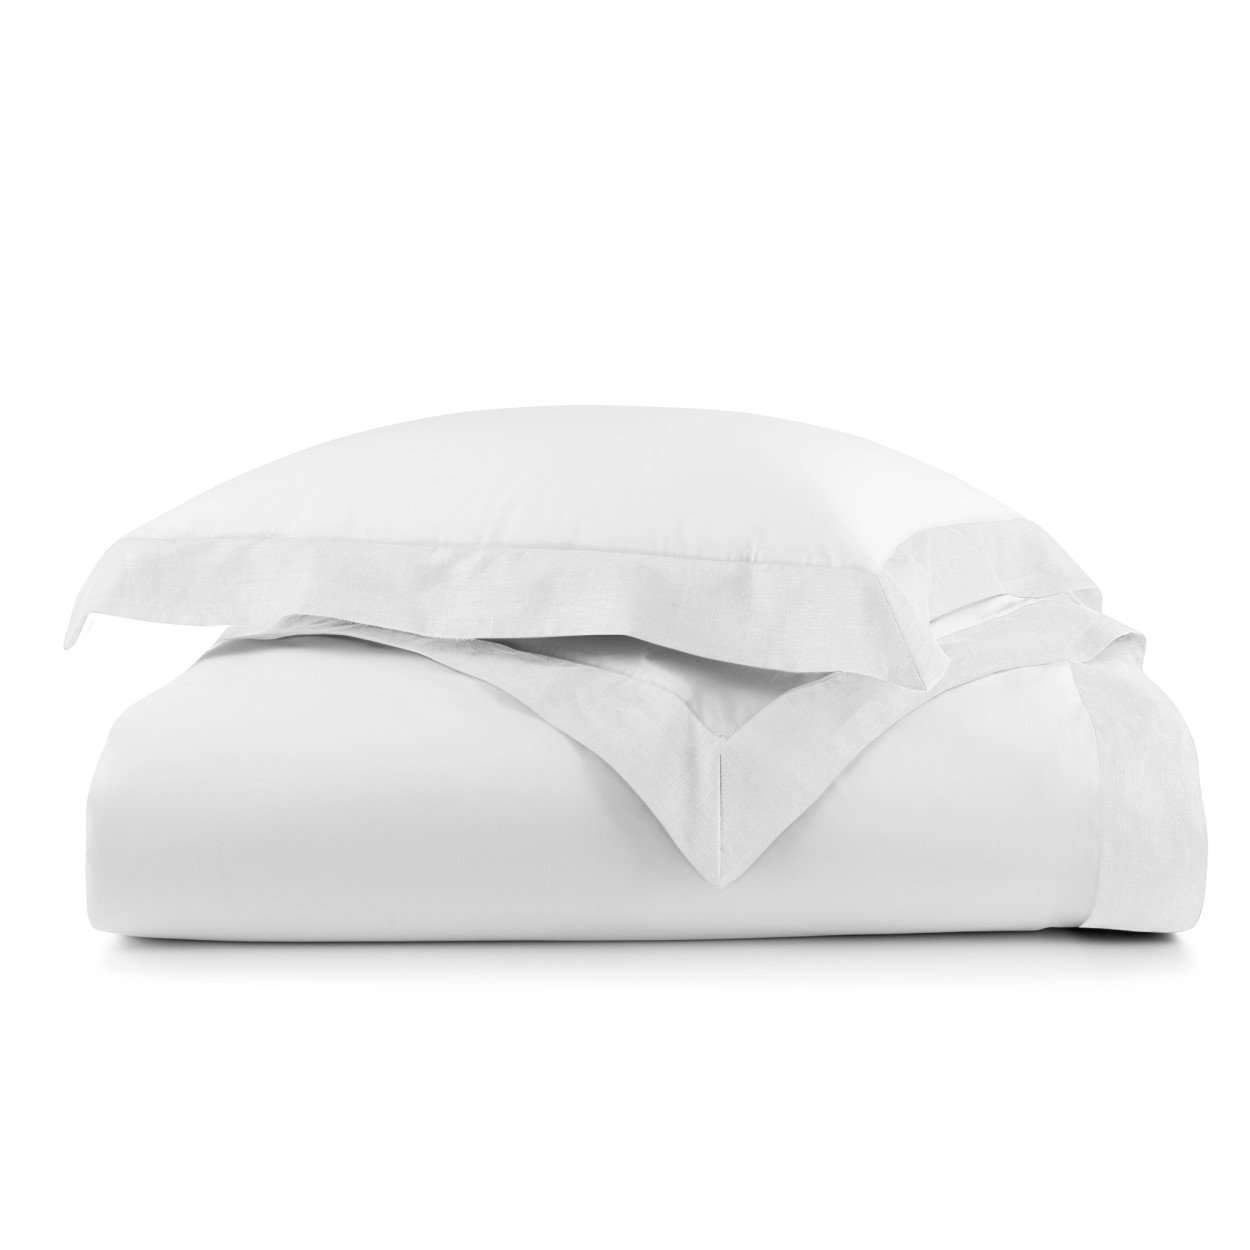 Duvet Covers Mandalay Linen Cuff Duvet Cover by Peacock Alley Twin / White Peacock Alley